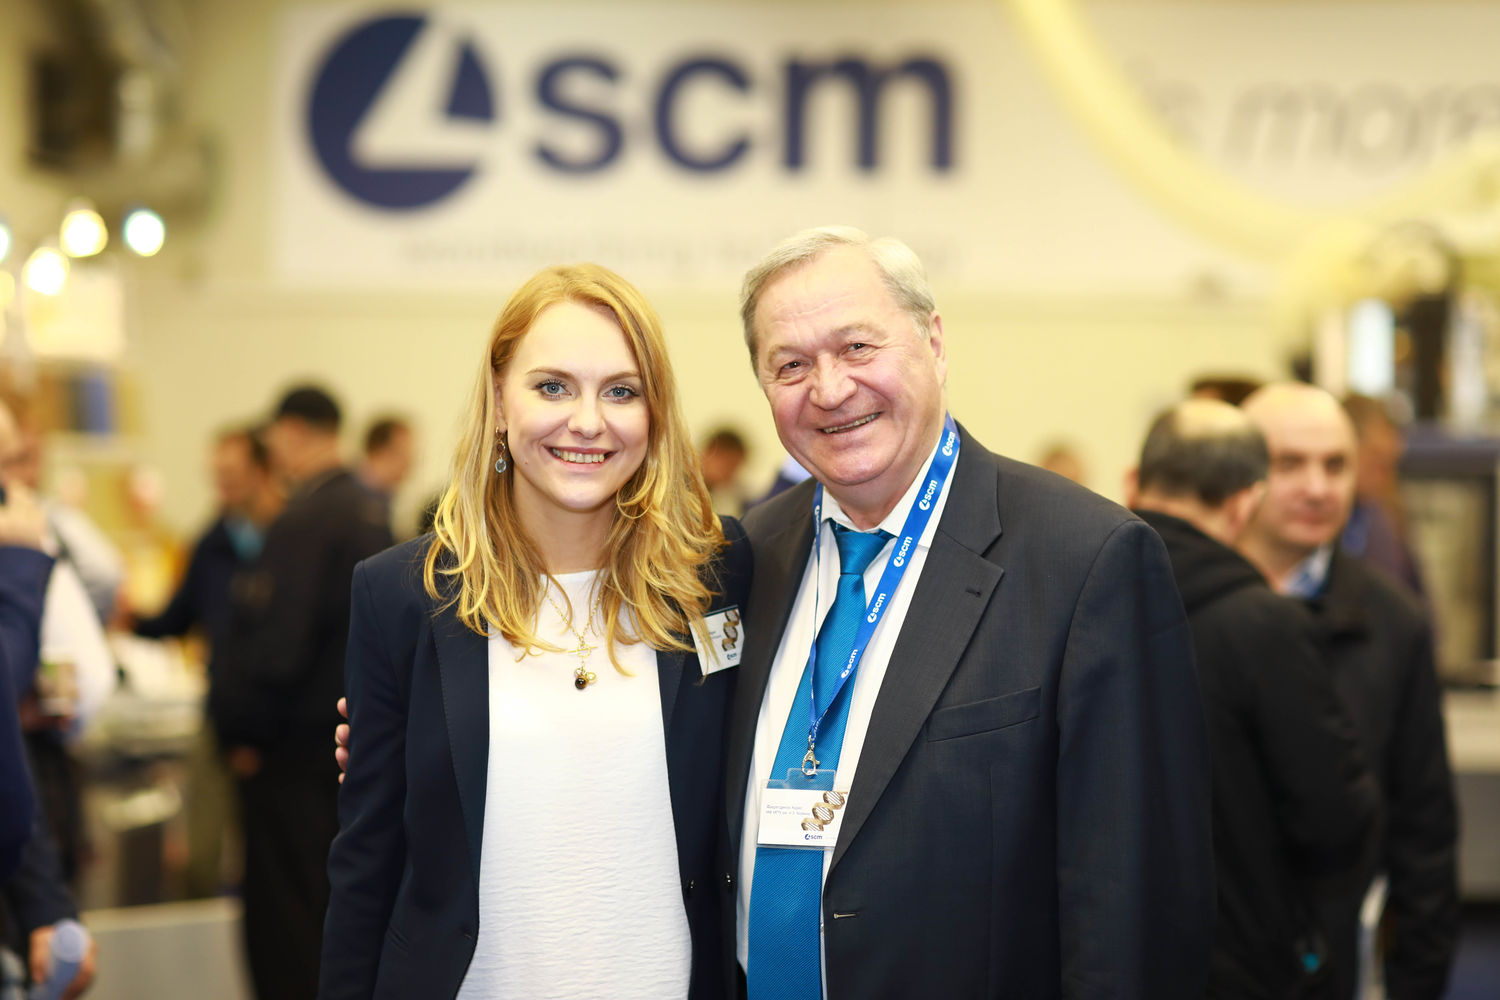 SCM Russia R-Evolution: meeting the specialists